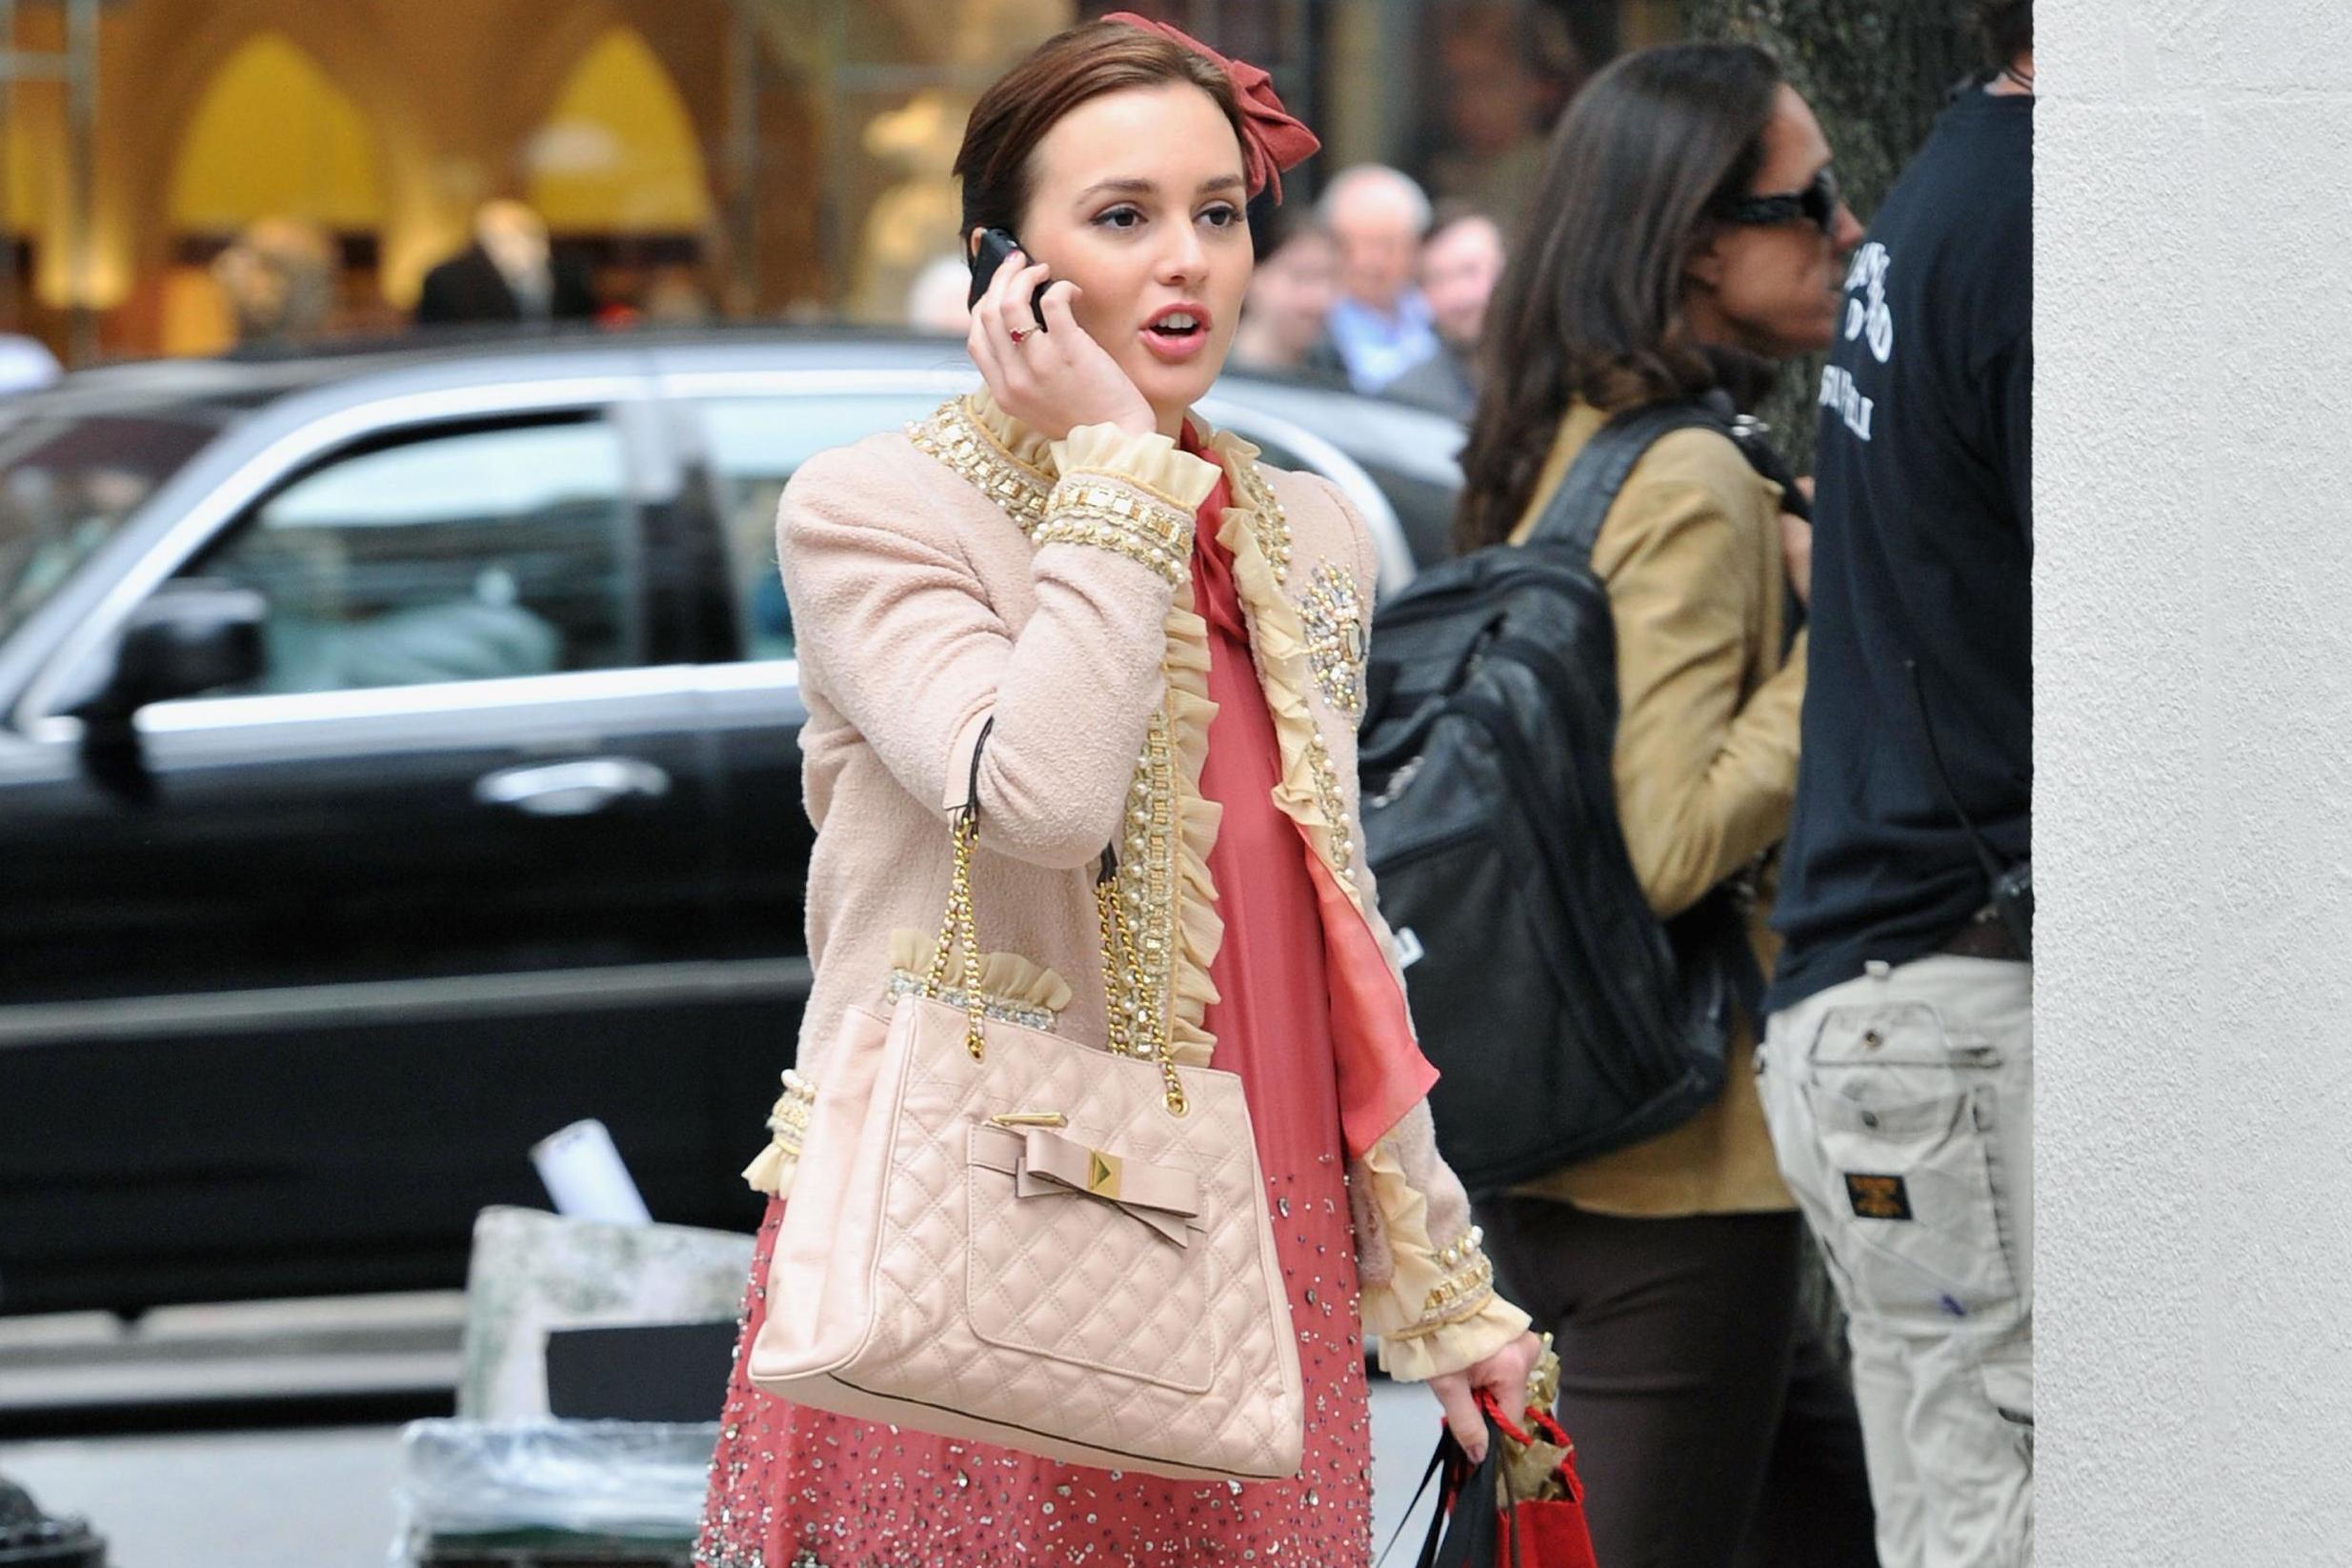 Gossip Girl reboot: HBO Max announces first details of teen drama